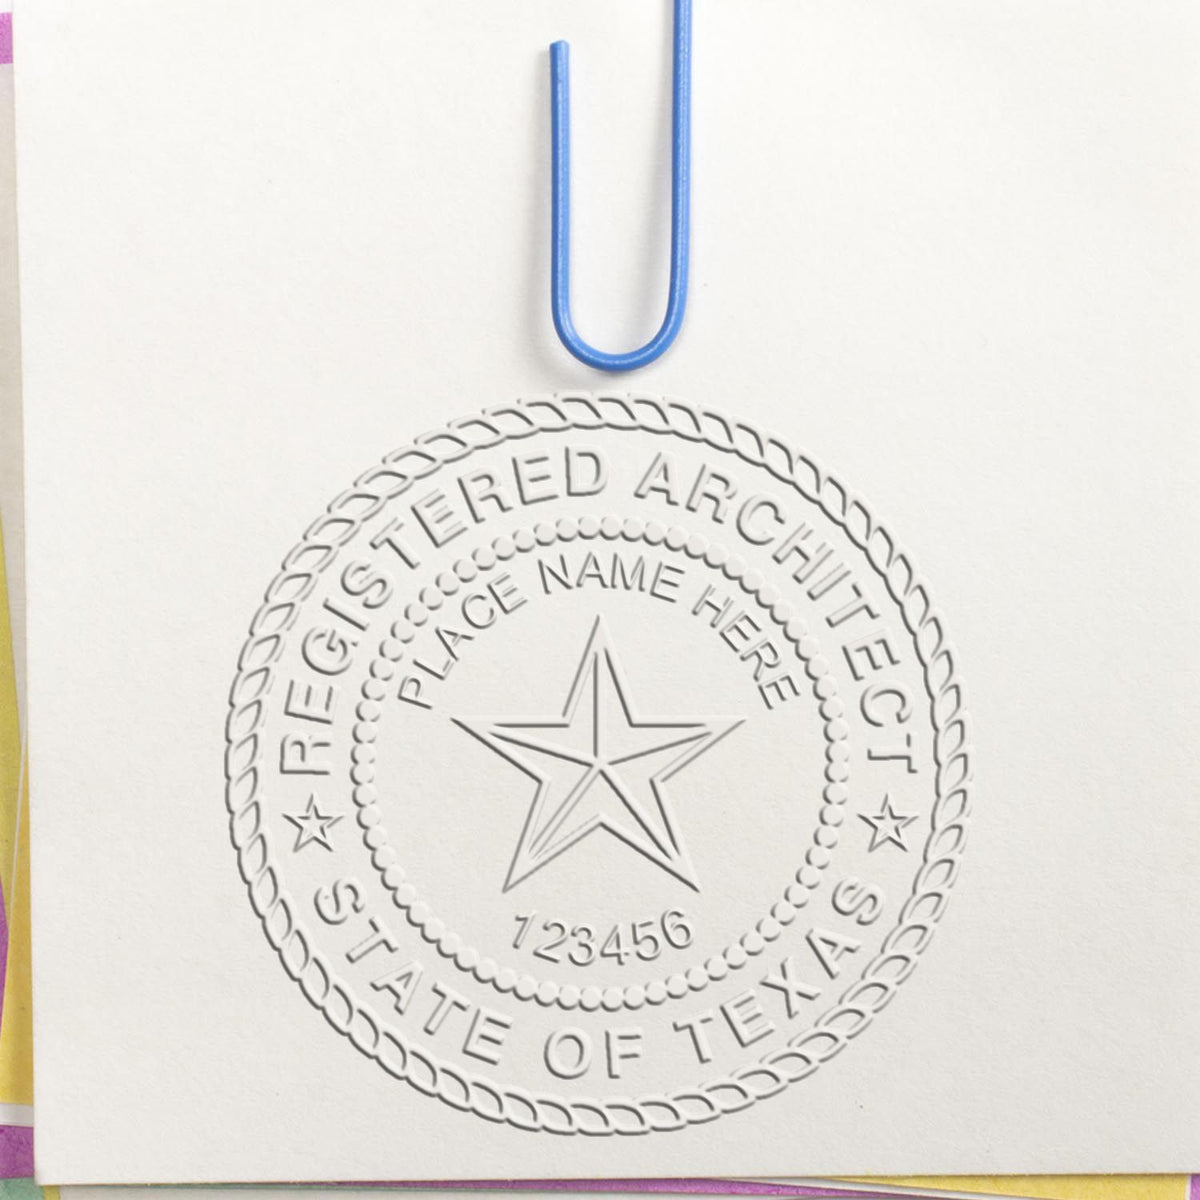 A stamped impression of the State of Texas Architectural Seal Embosser in this stylish lifestyle photo, setting the tone for a unique and personalized product.